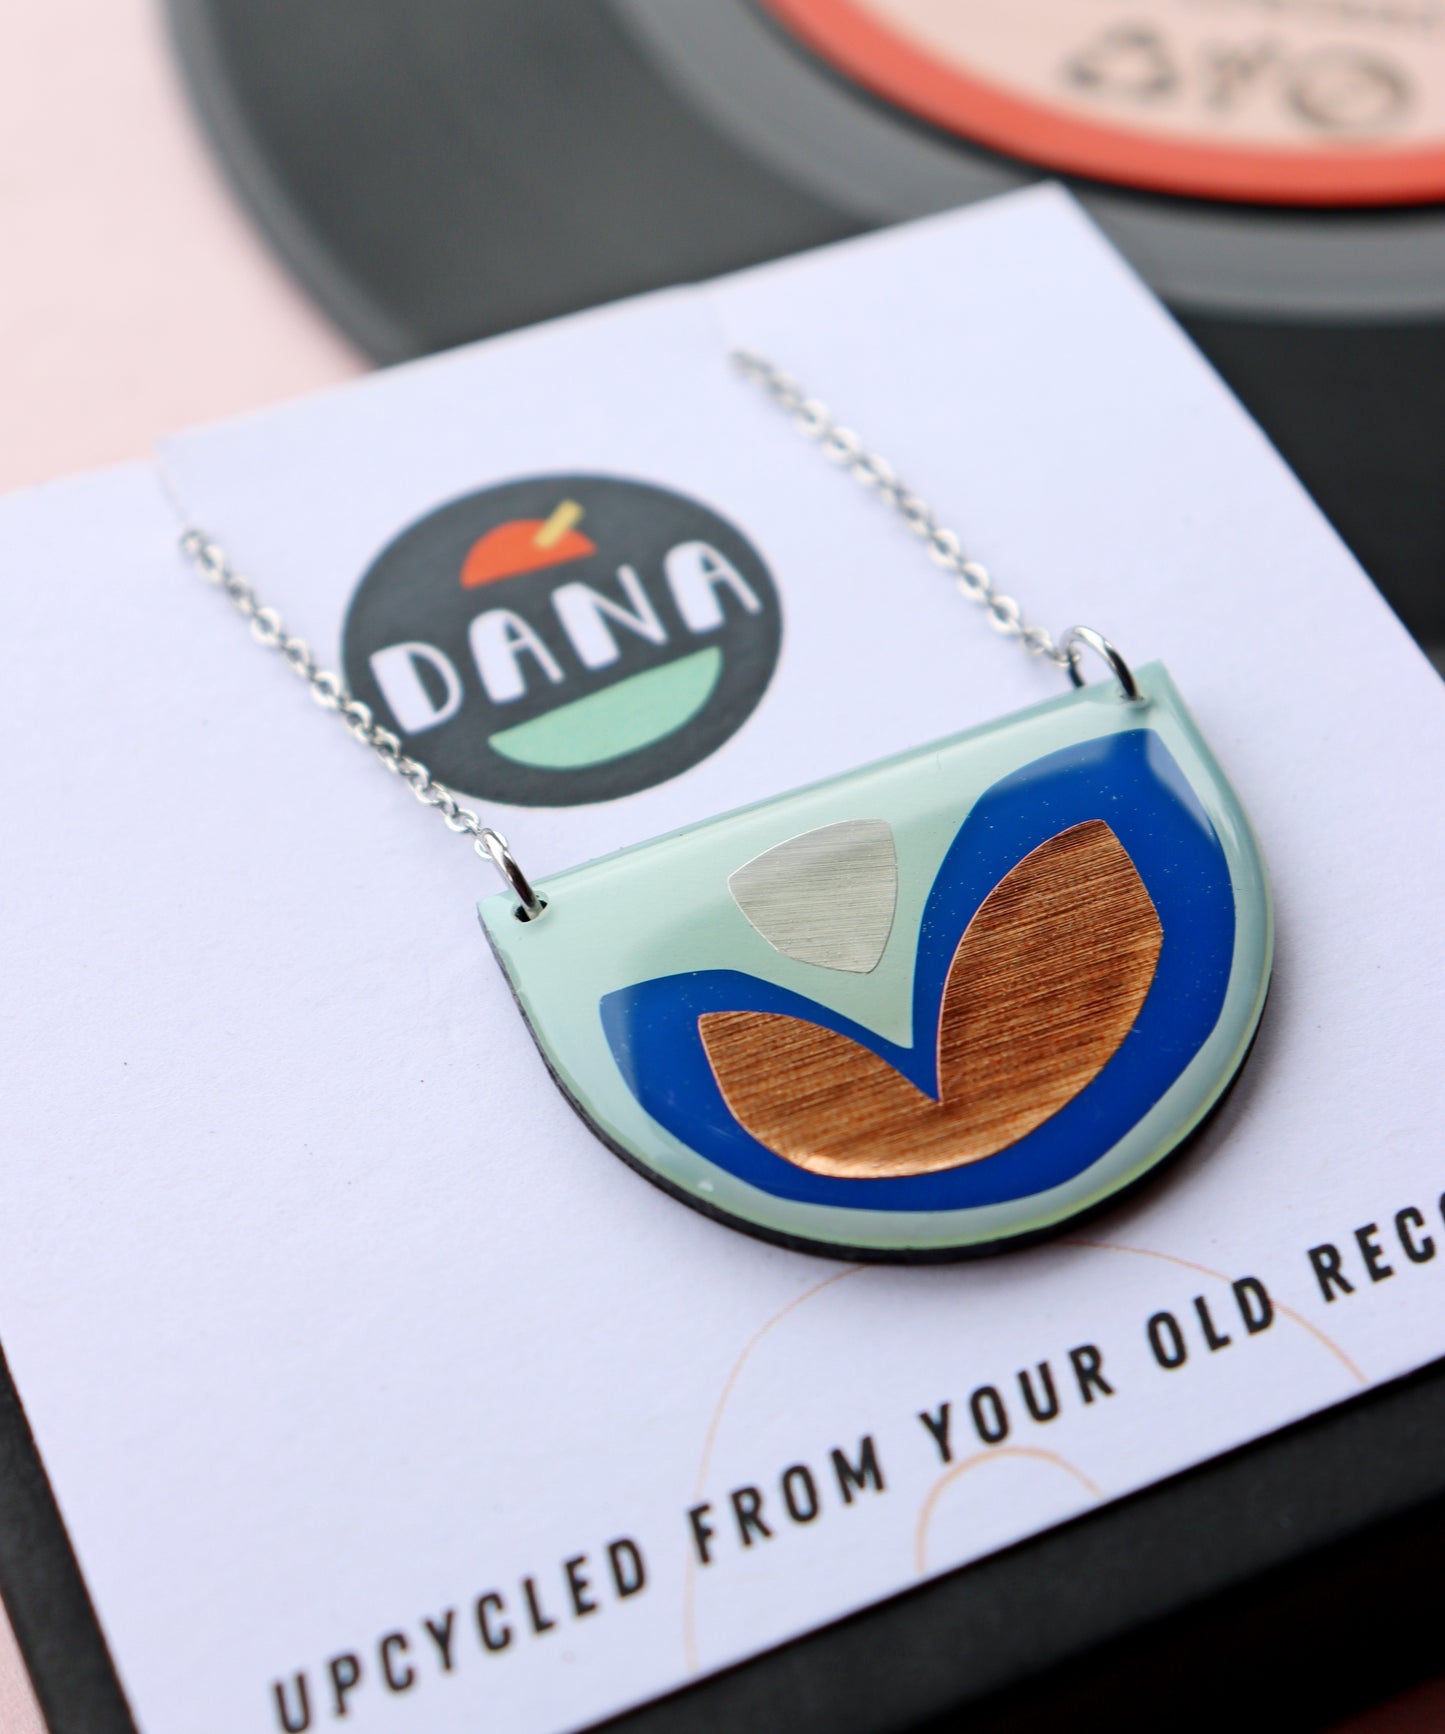 30% OFF / FLOR upcycled vinyl record necklace in blue, copper and silver